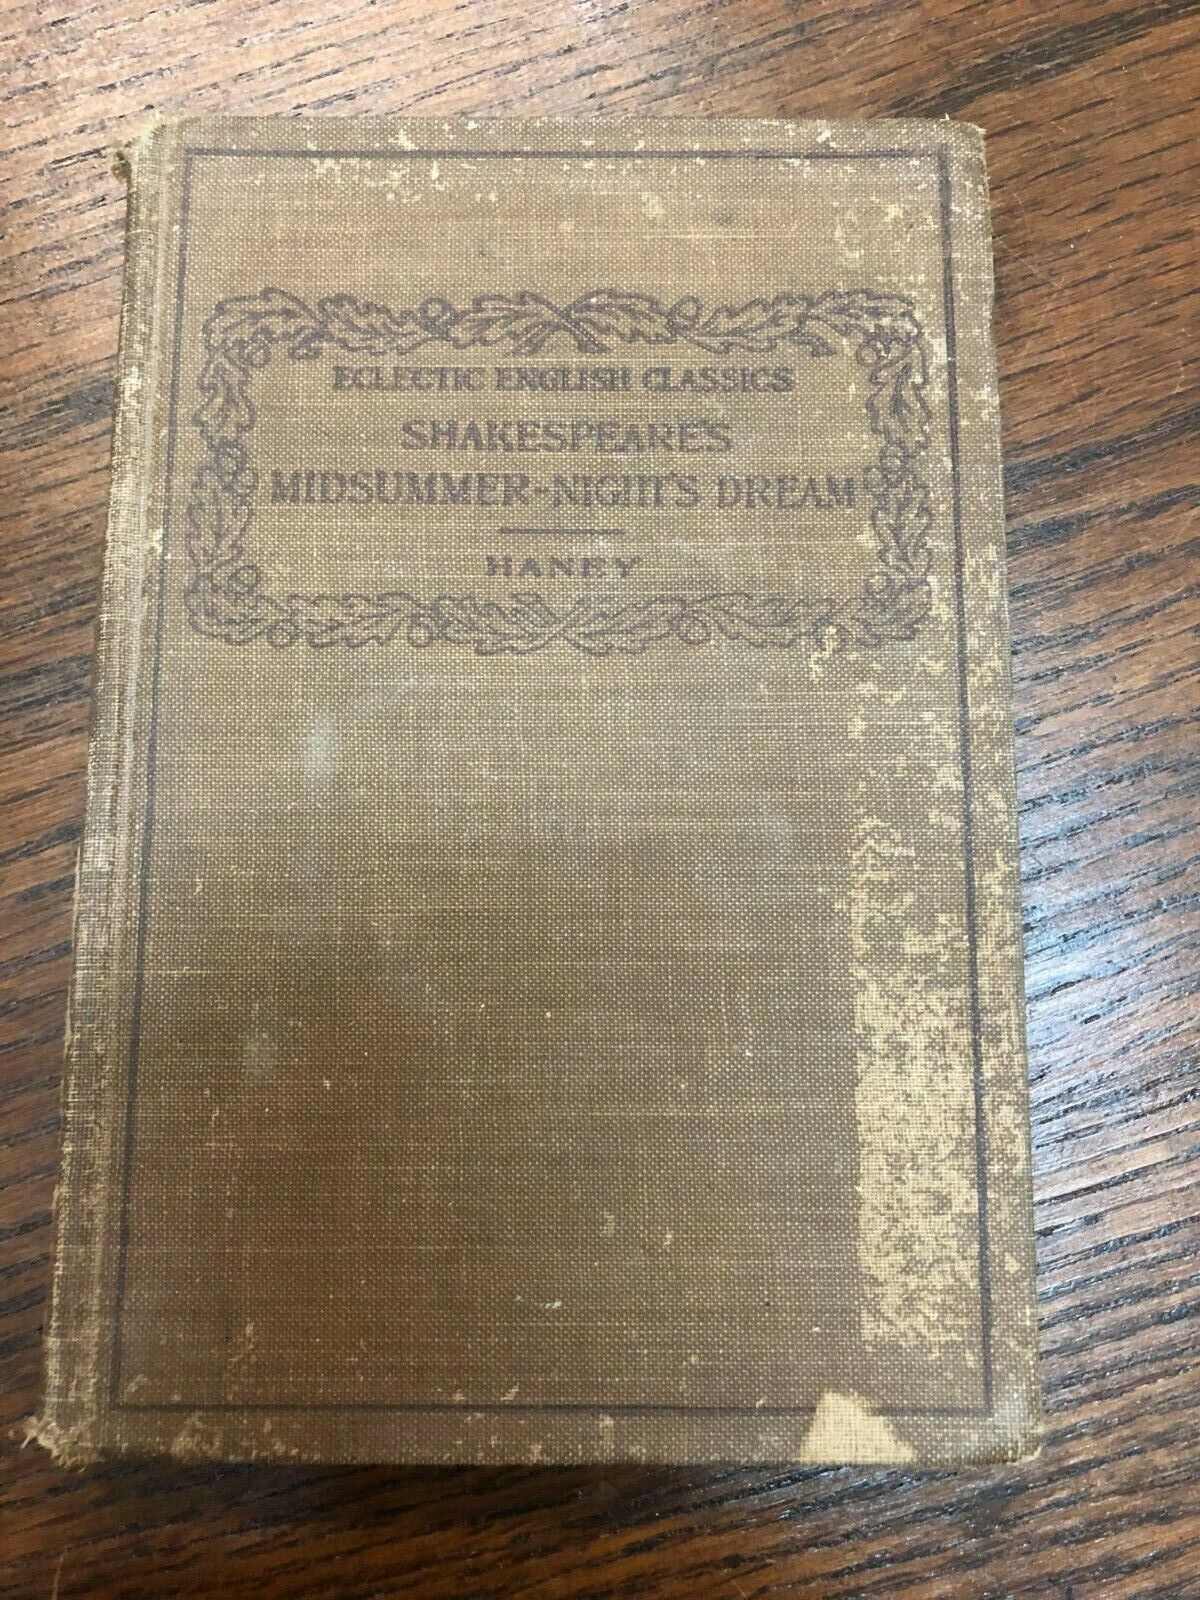 Antique Book Midsummer - Nights Dream Shakespeares Haney 1911 with study guide 